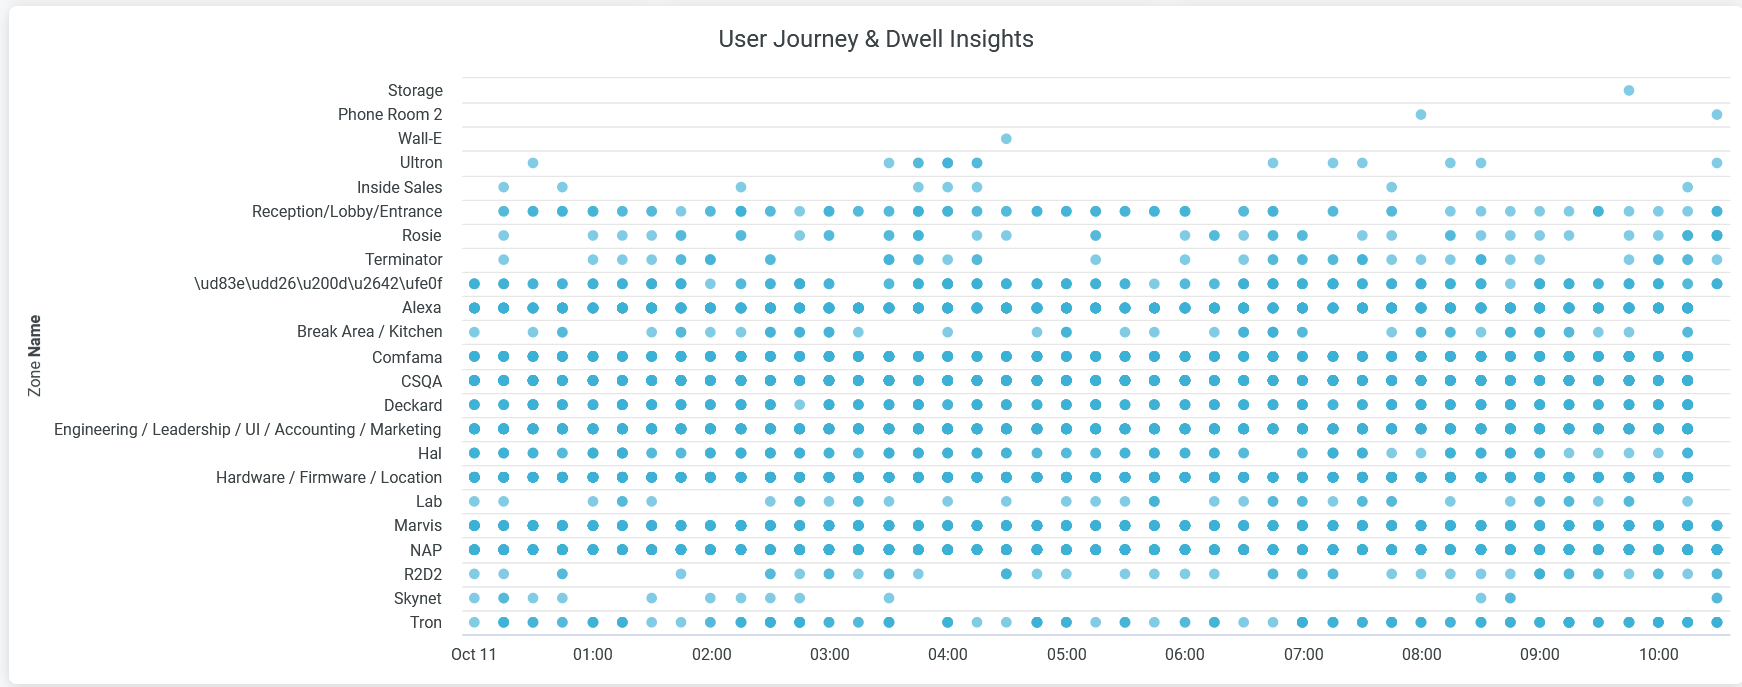 User Journey and Dwell Insights